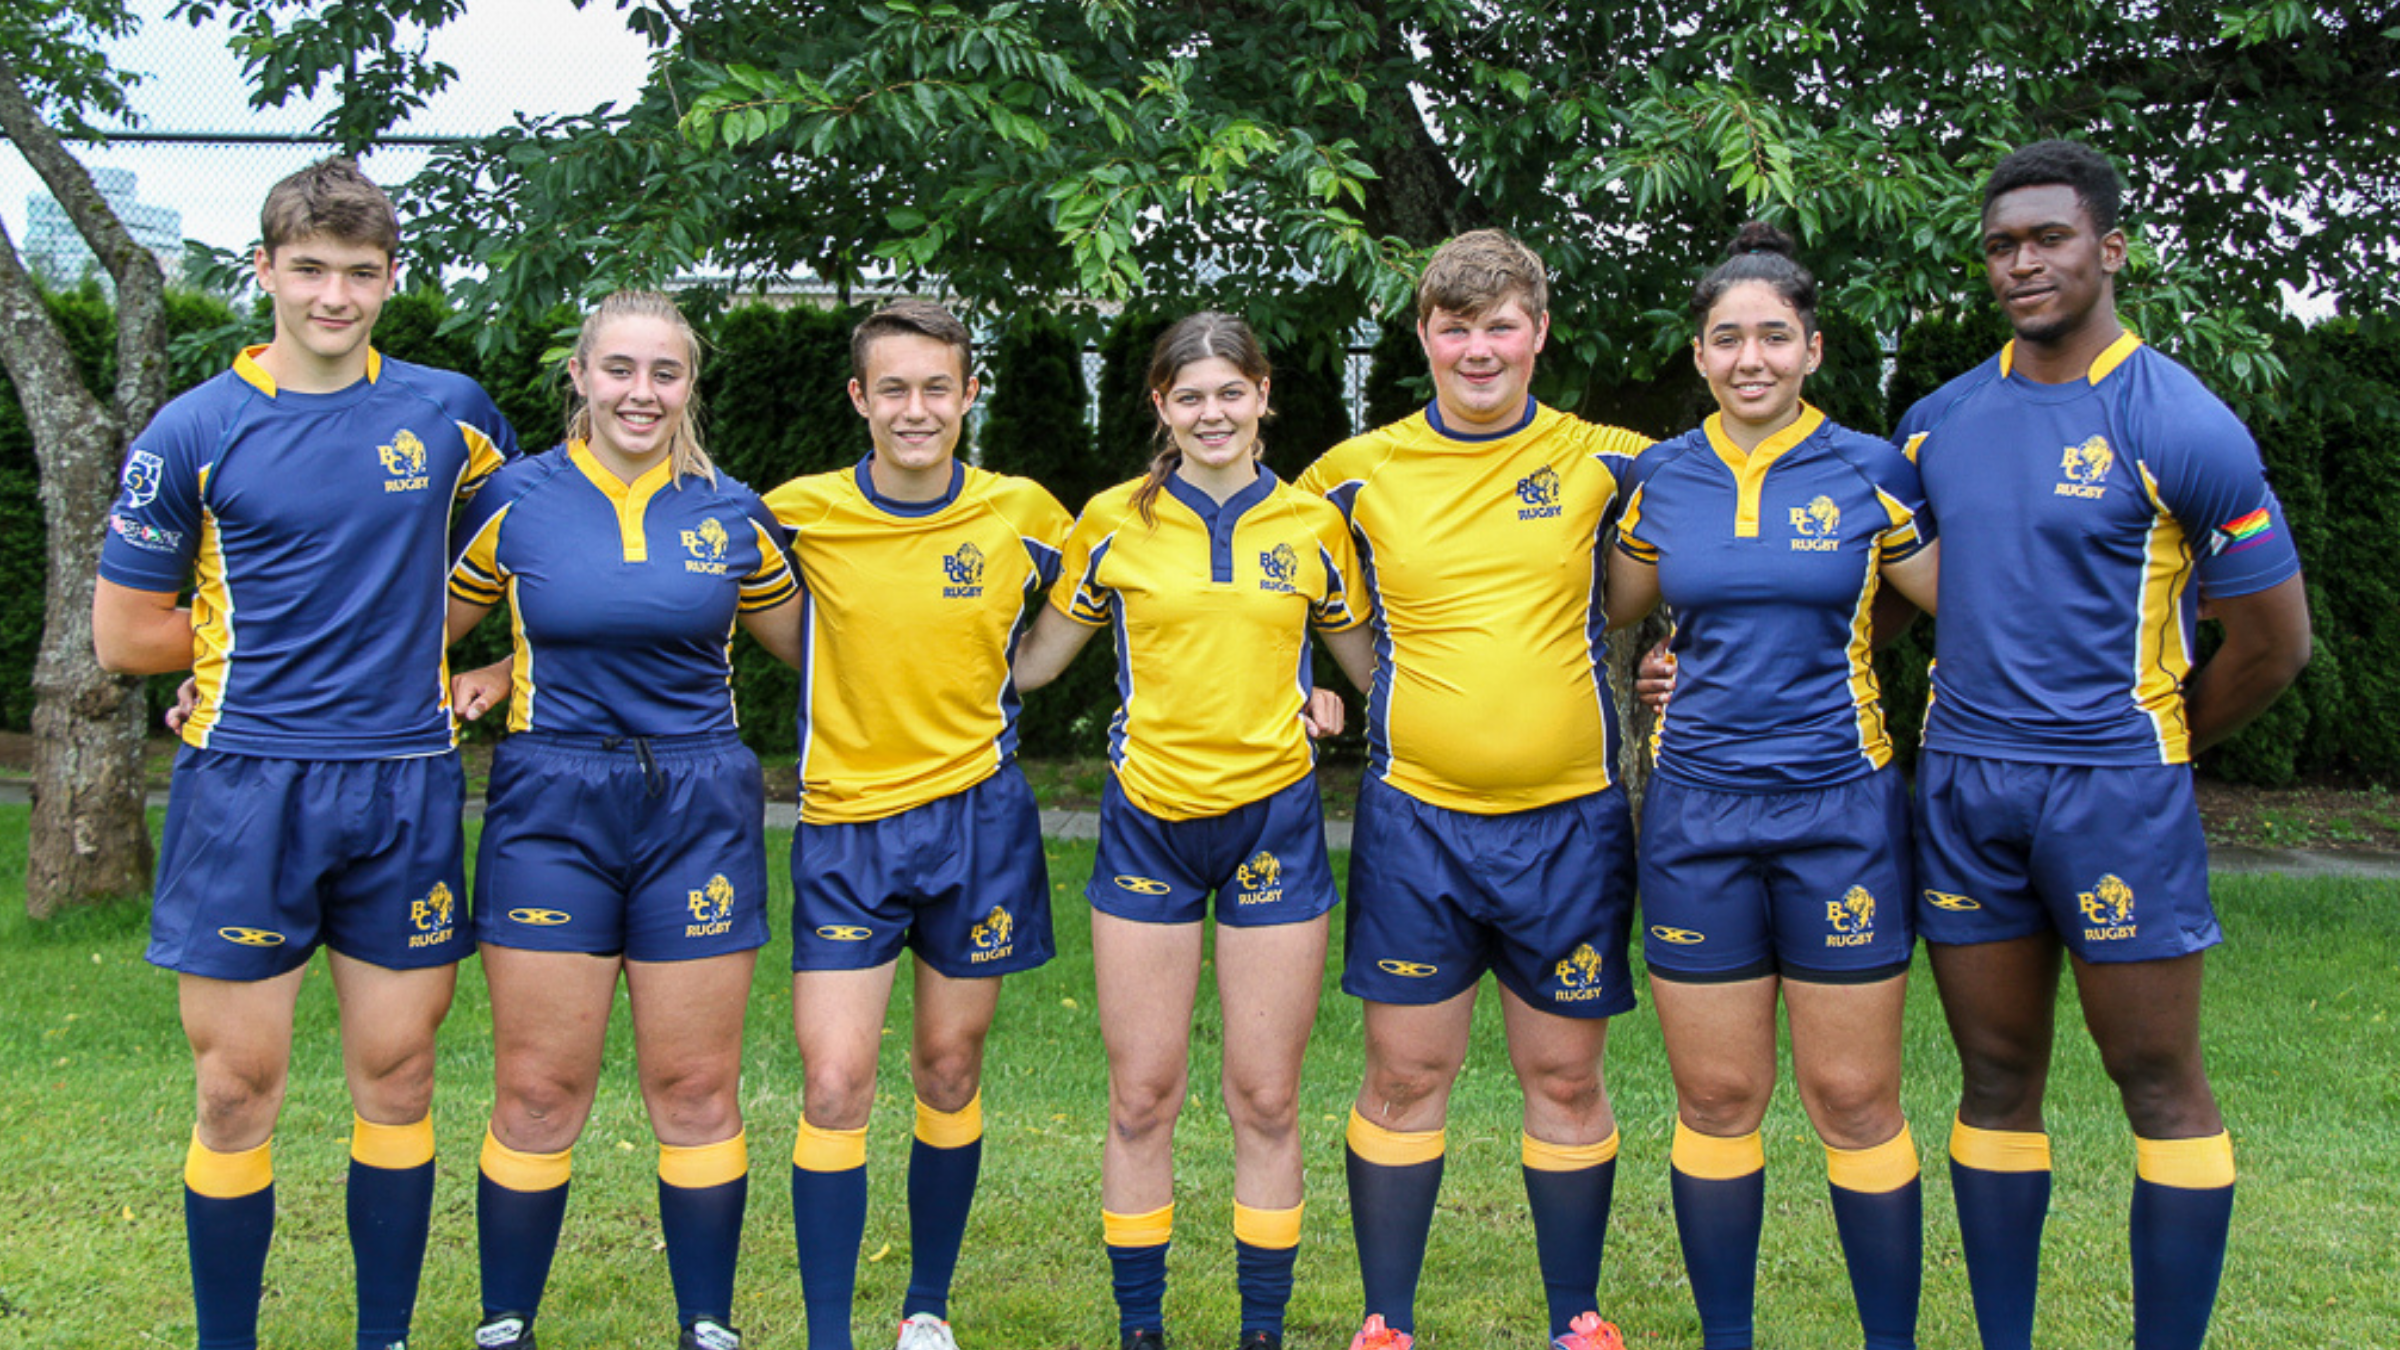 Four male and three female players model the new navy and gold BC Bears kits